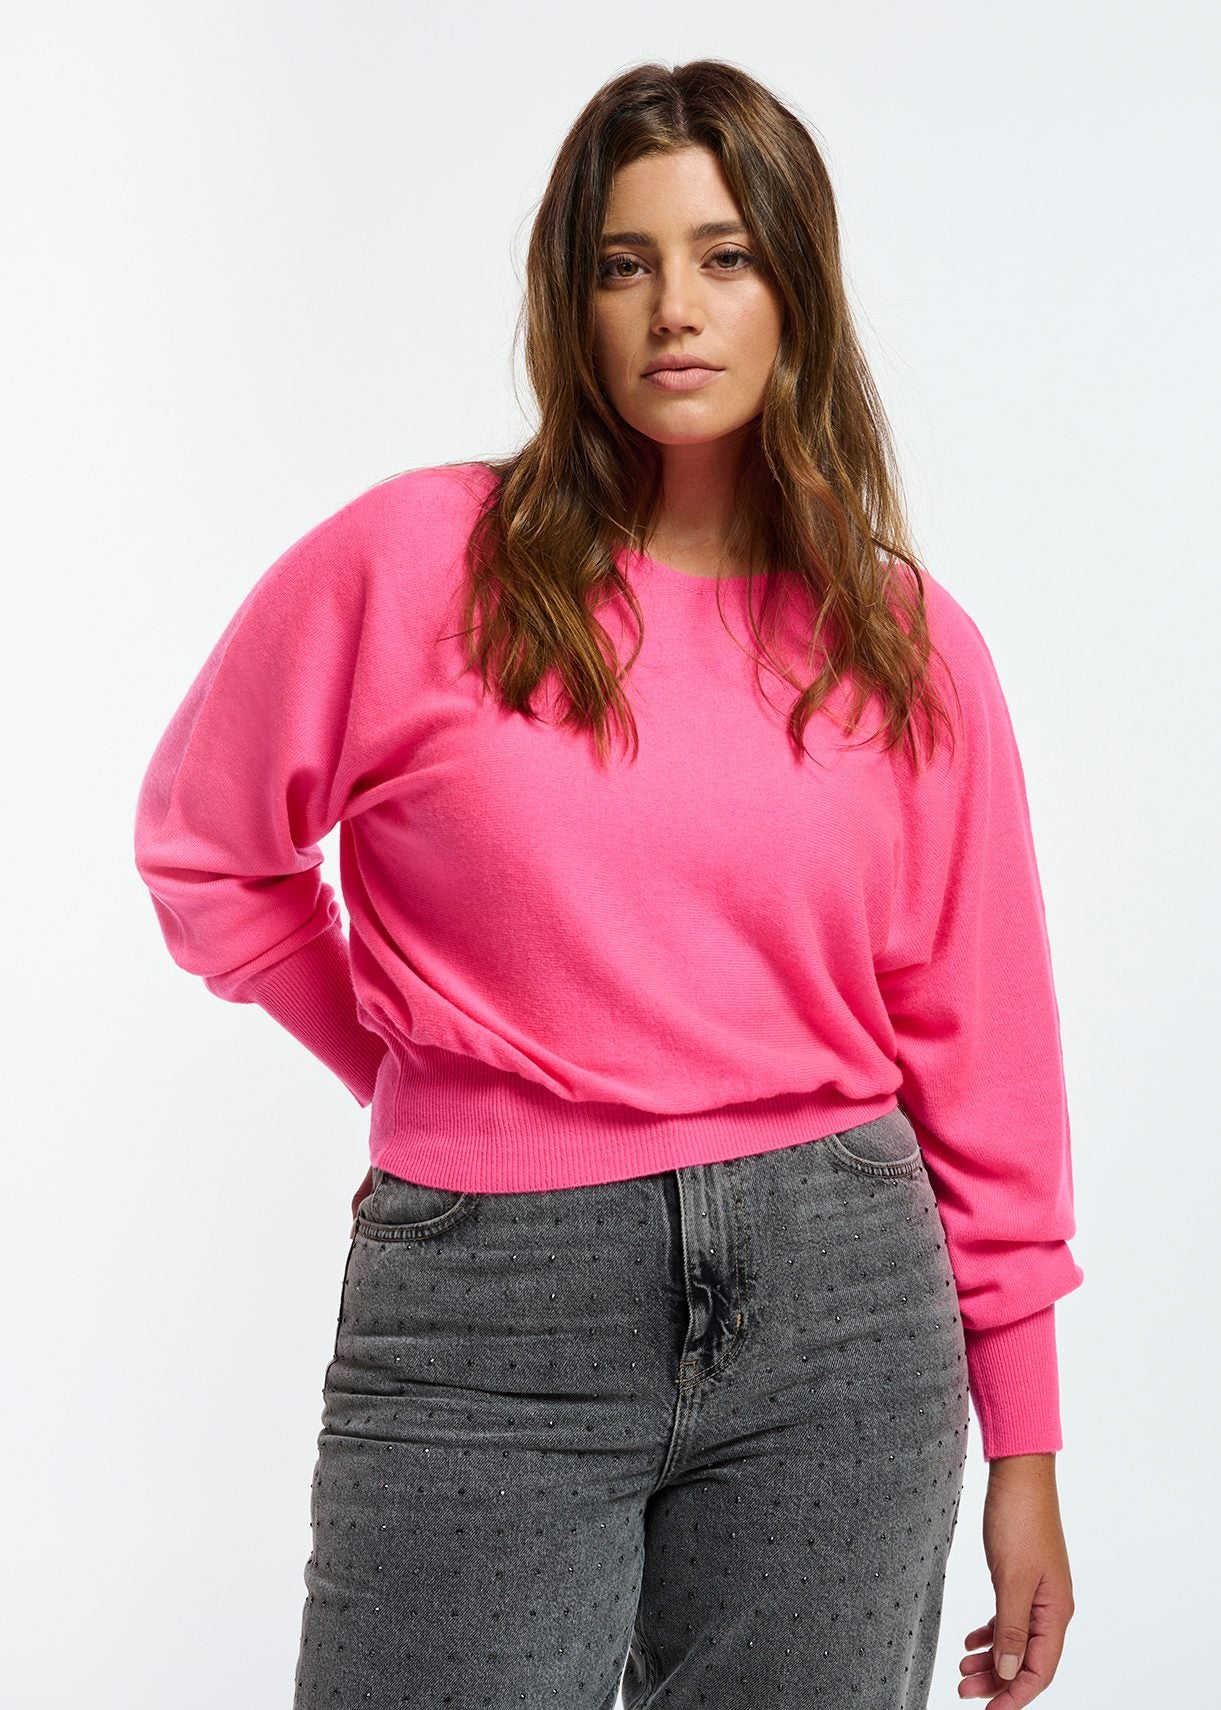 Model wears bright pink sweater with boat neckline.